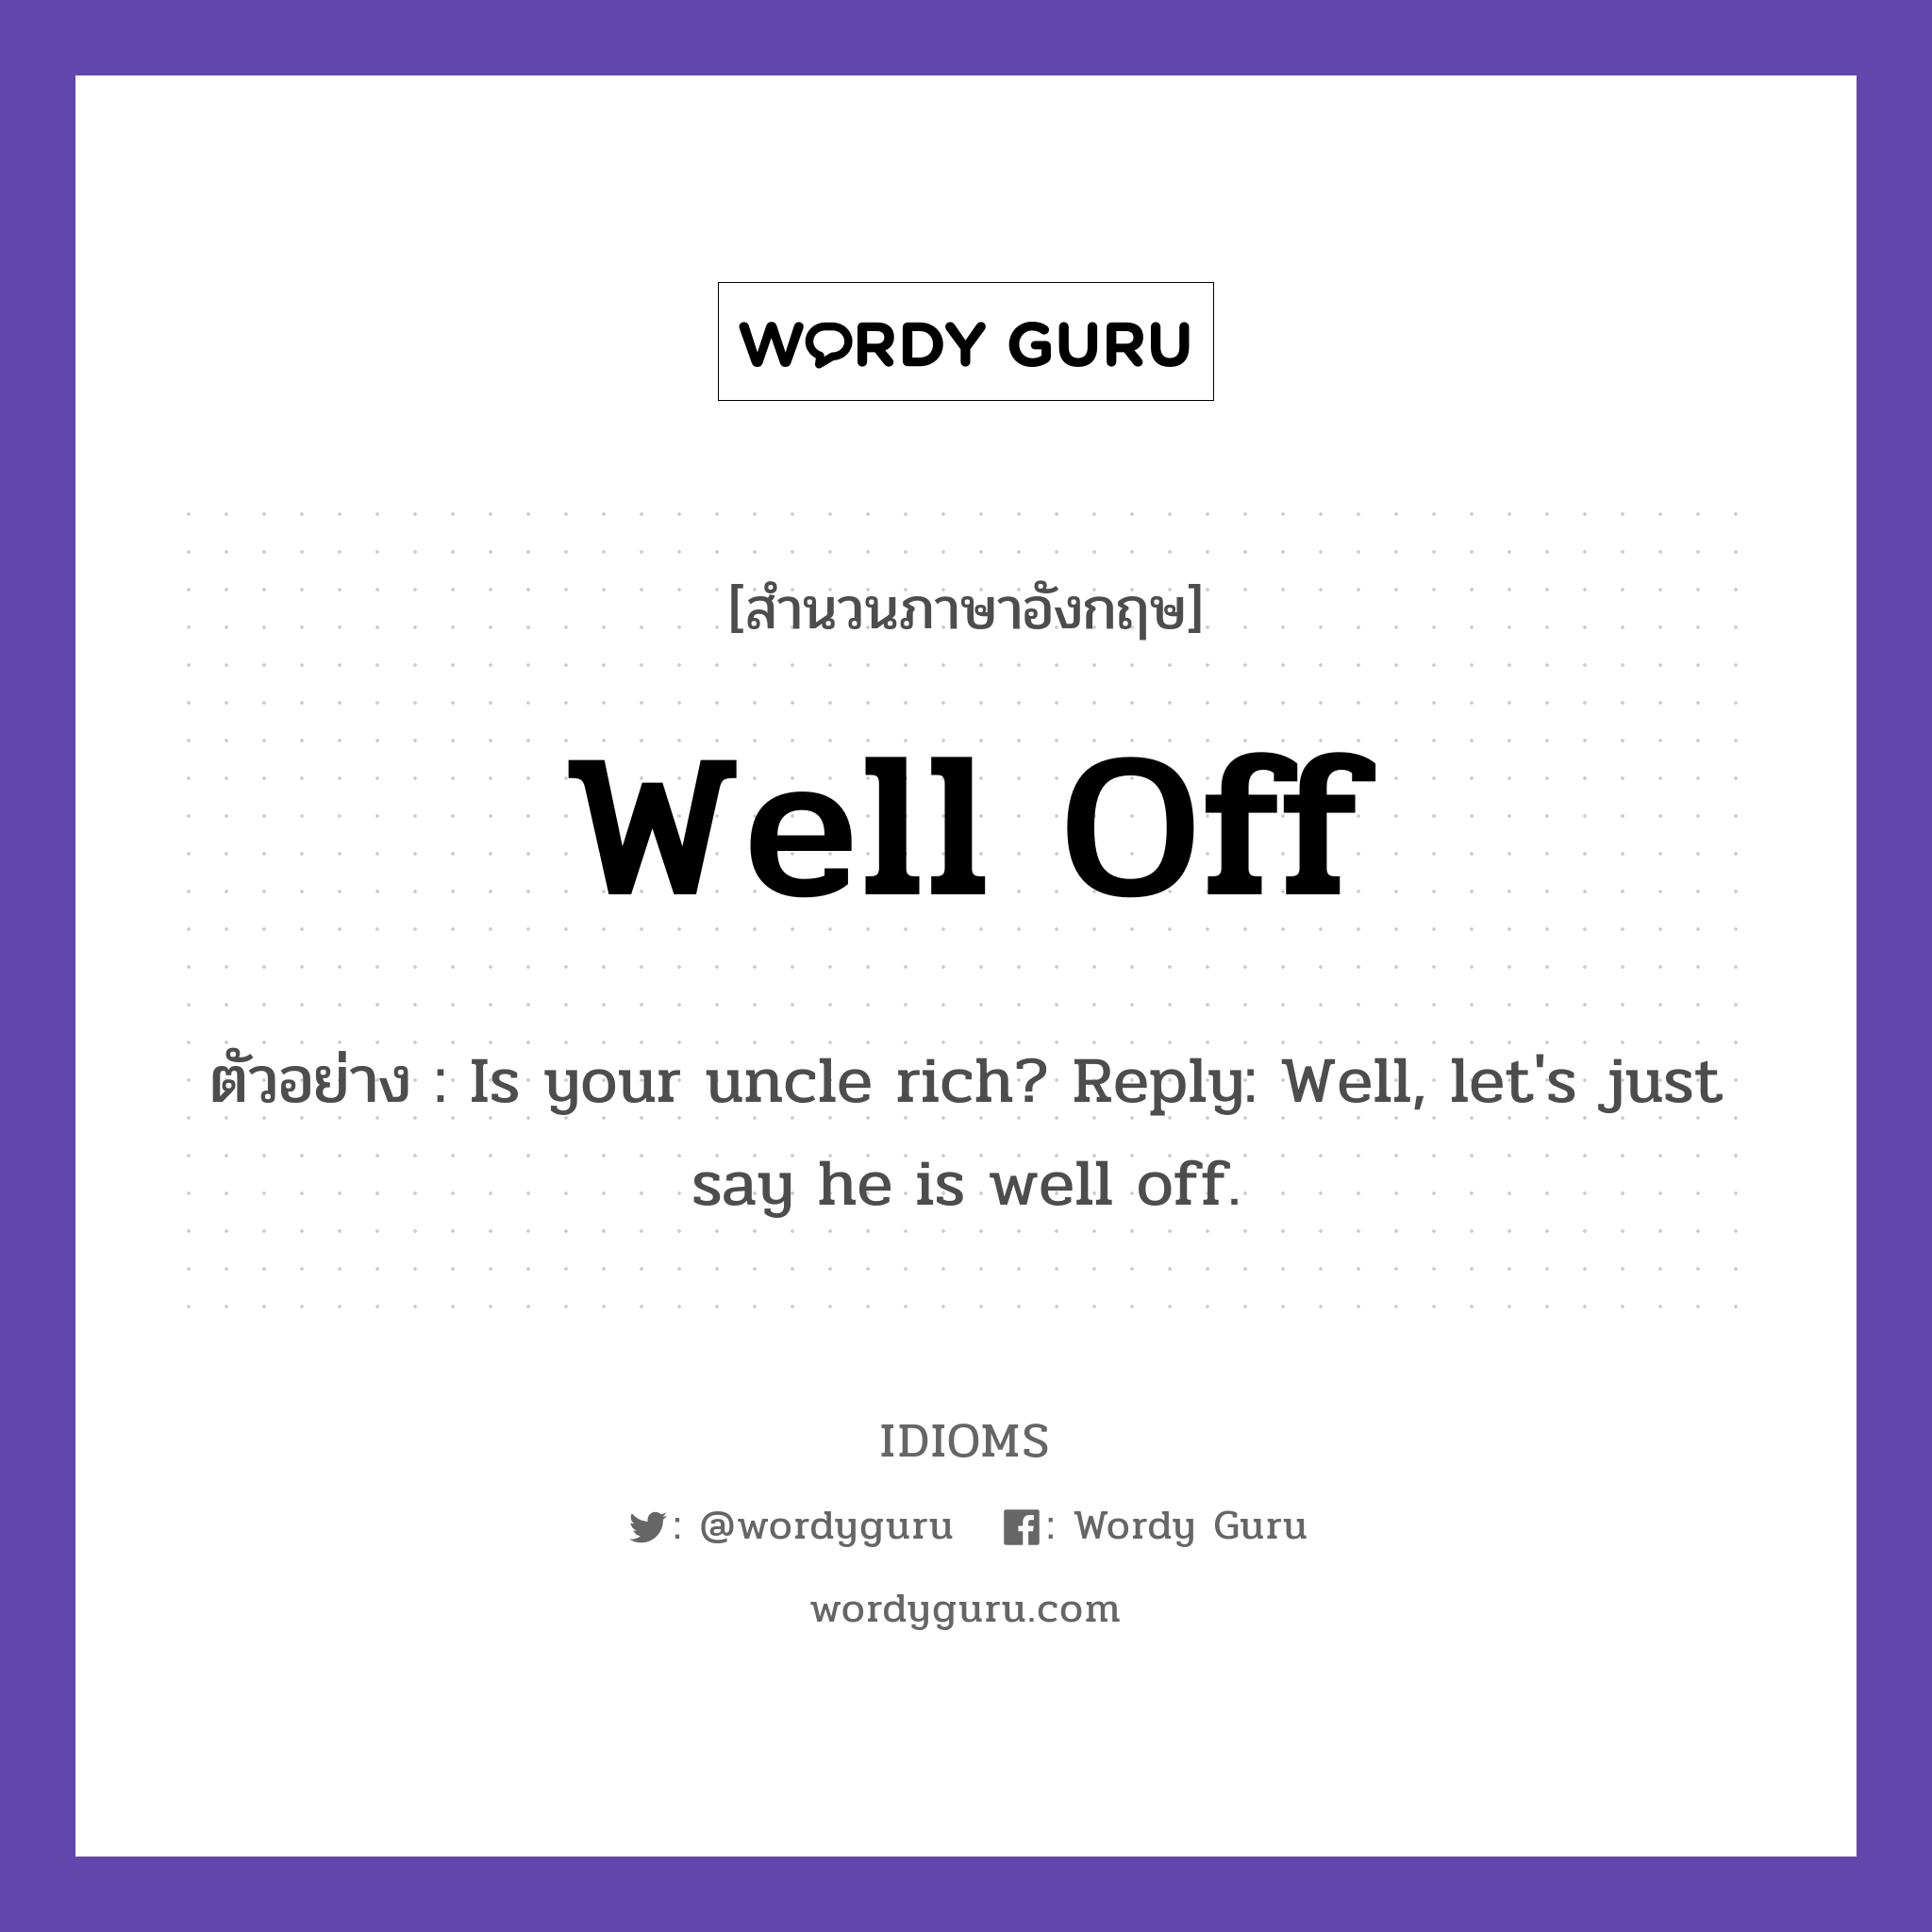 Well Off แปลว่า?, สำนวนภาษาอังกฤษ Well Off ตัวอย่าง Is your uncle rich? Reply: Well, let's just say he is well off.